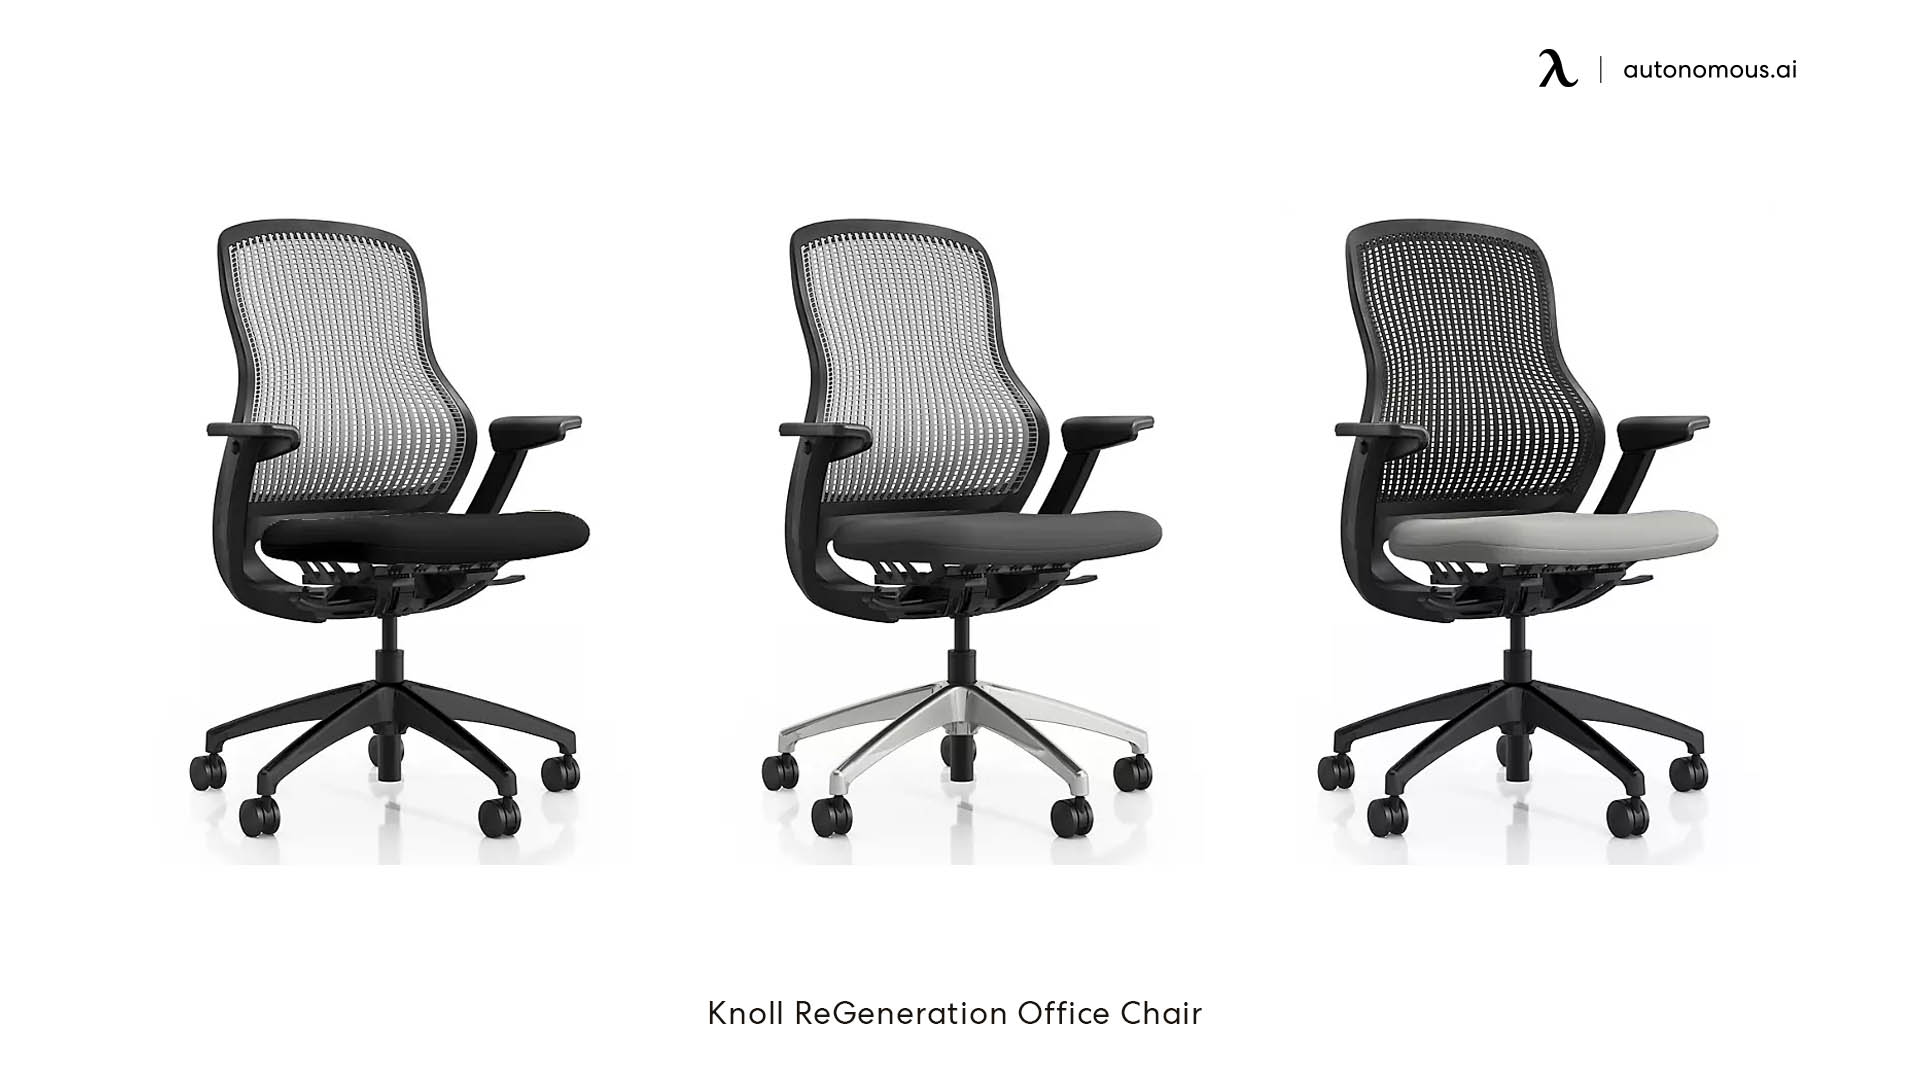 Multi-generation by Knoll durable office chair